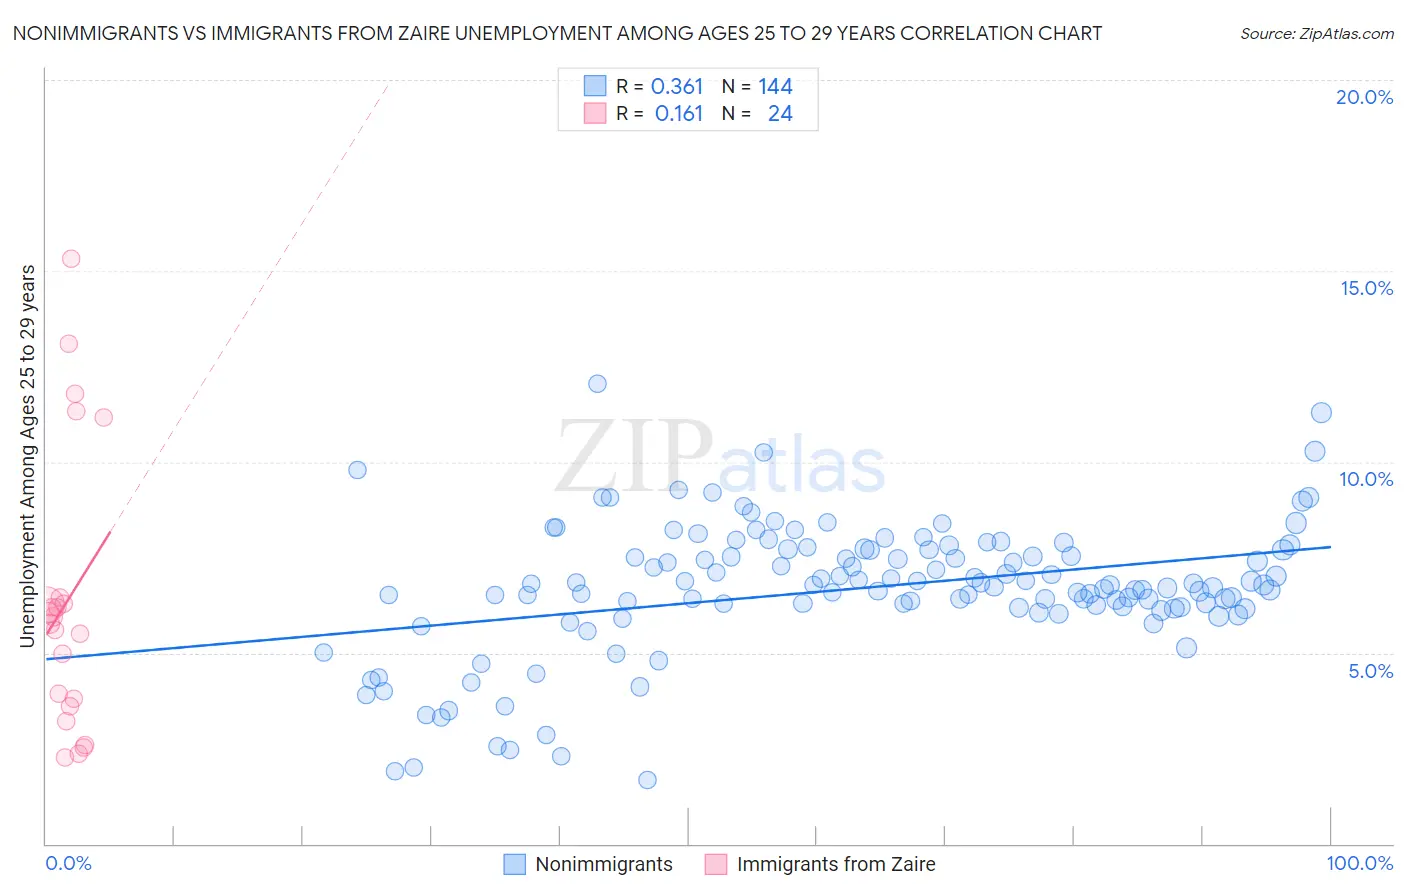 Nonimmigrants vs Immigrants from Zaire Unemployment Among Ages 25 to 29 years